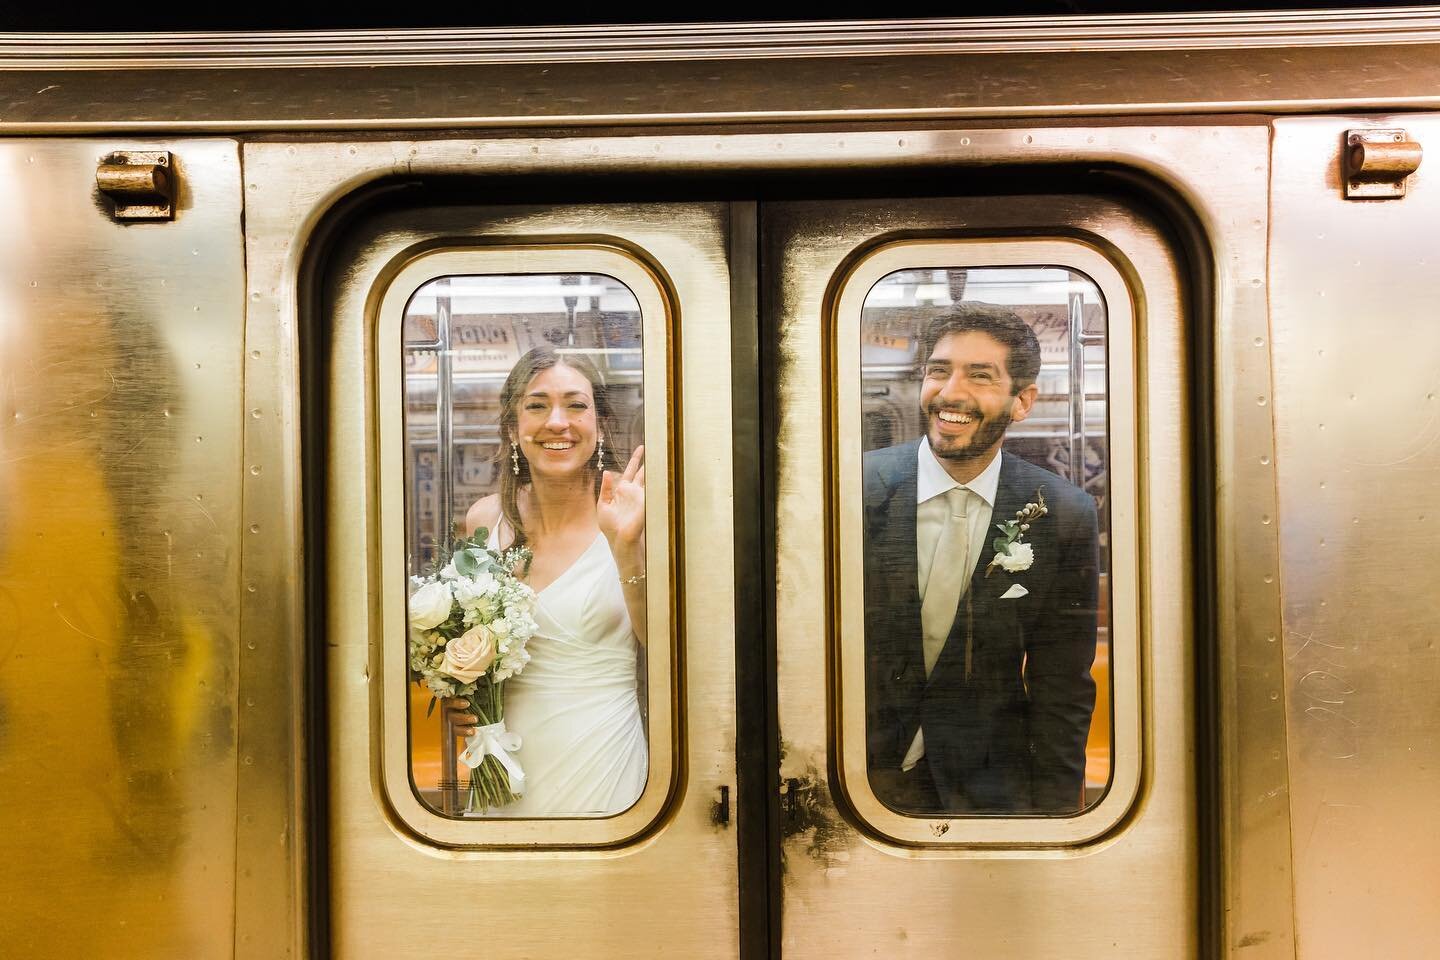 When the subway door LITERALLY closes on your face 😂 / don&rsquo;t worry, met up with them again at the next stop hahah!! 

#nycsubway #nycweddings #nycelopement